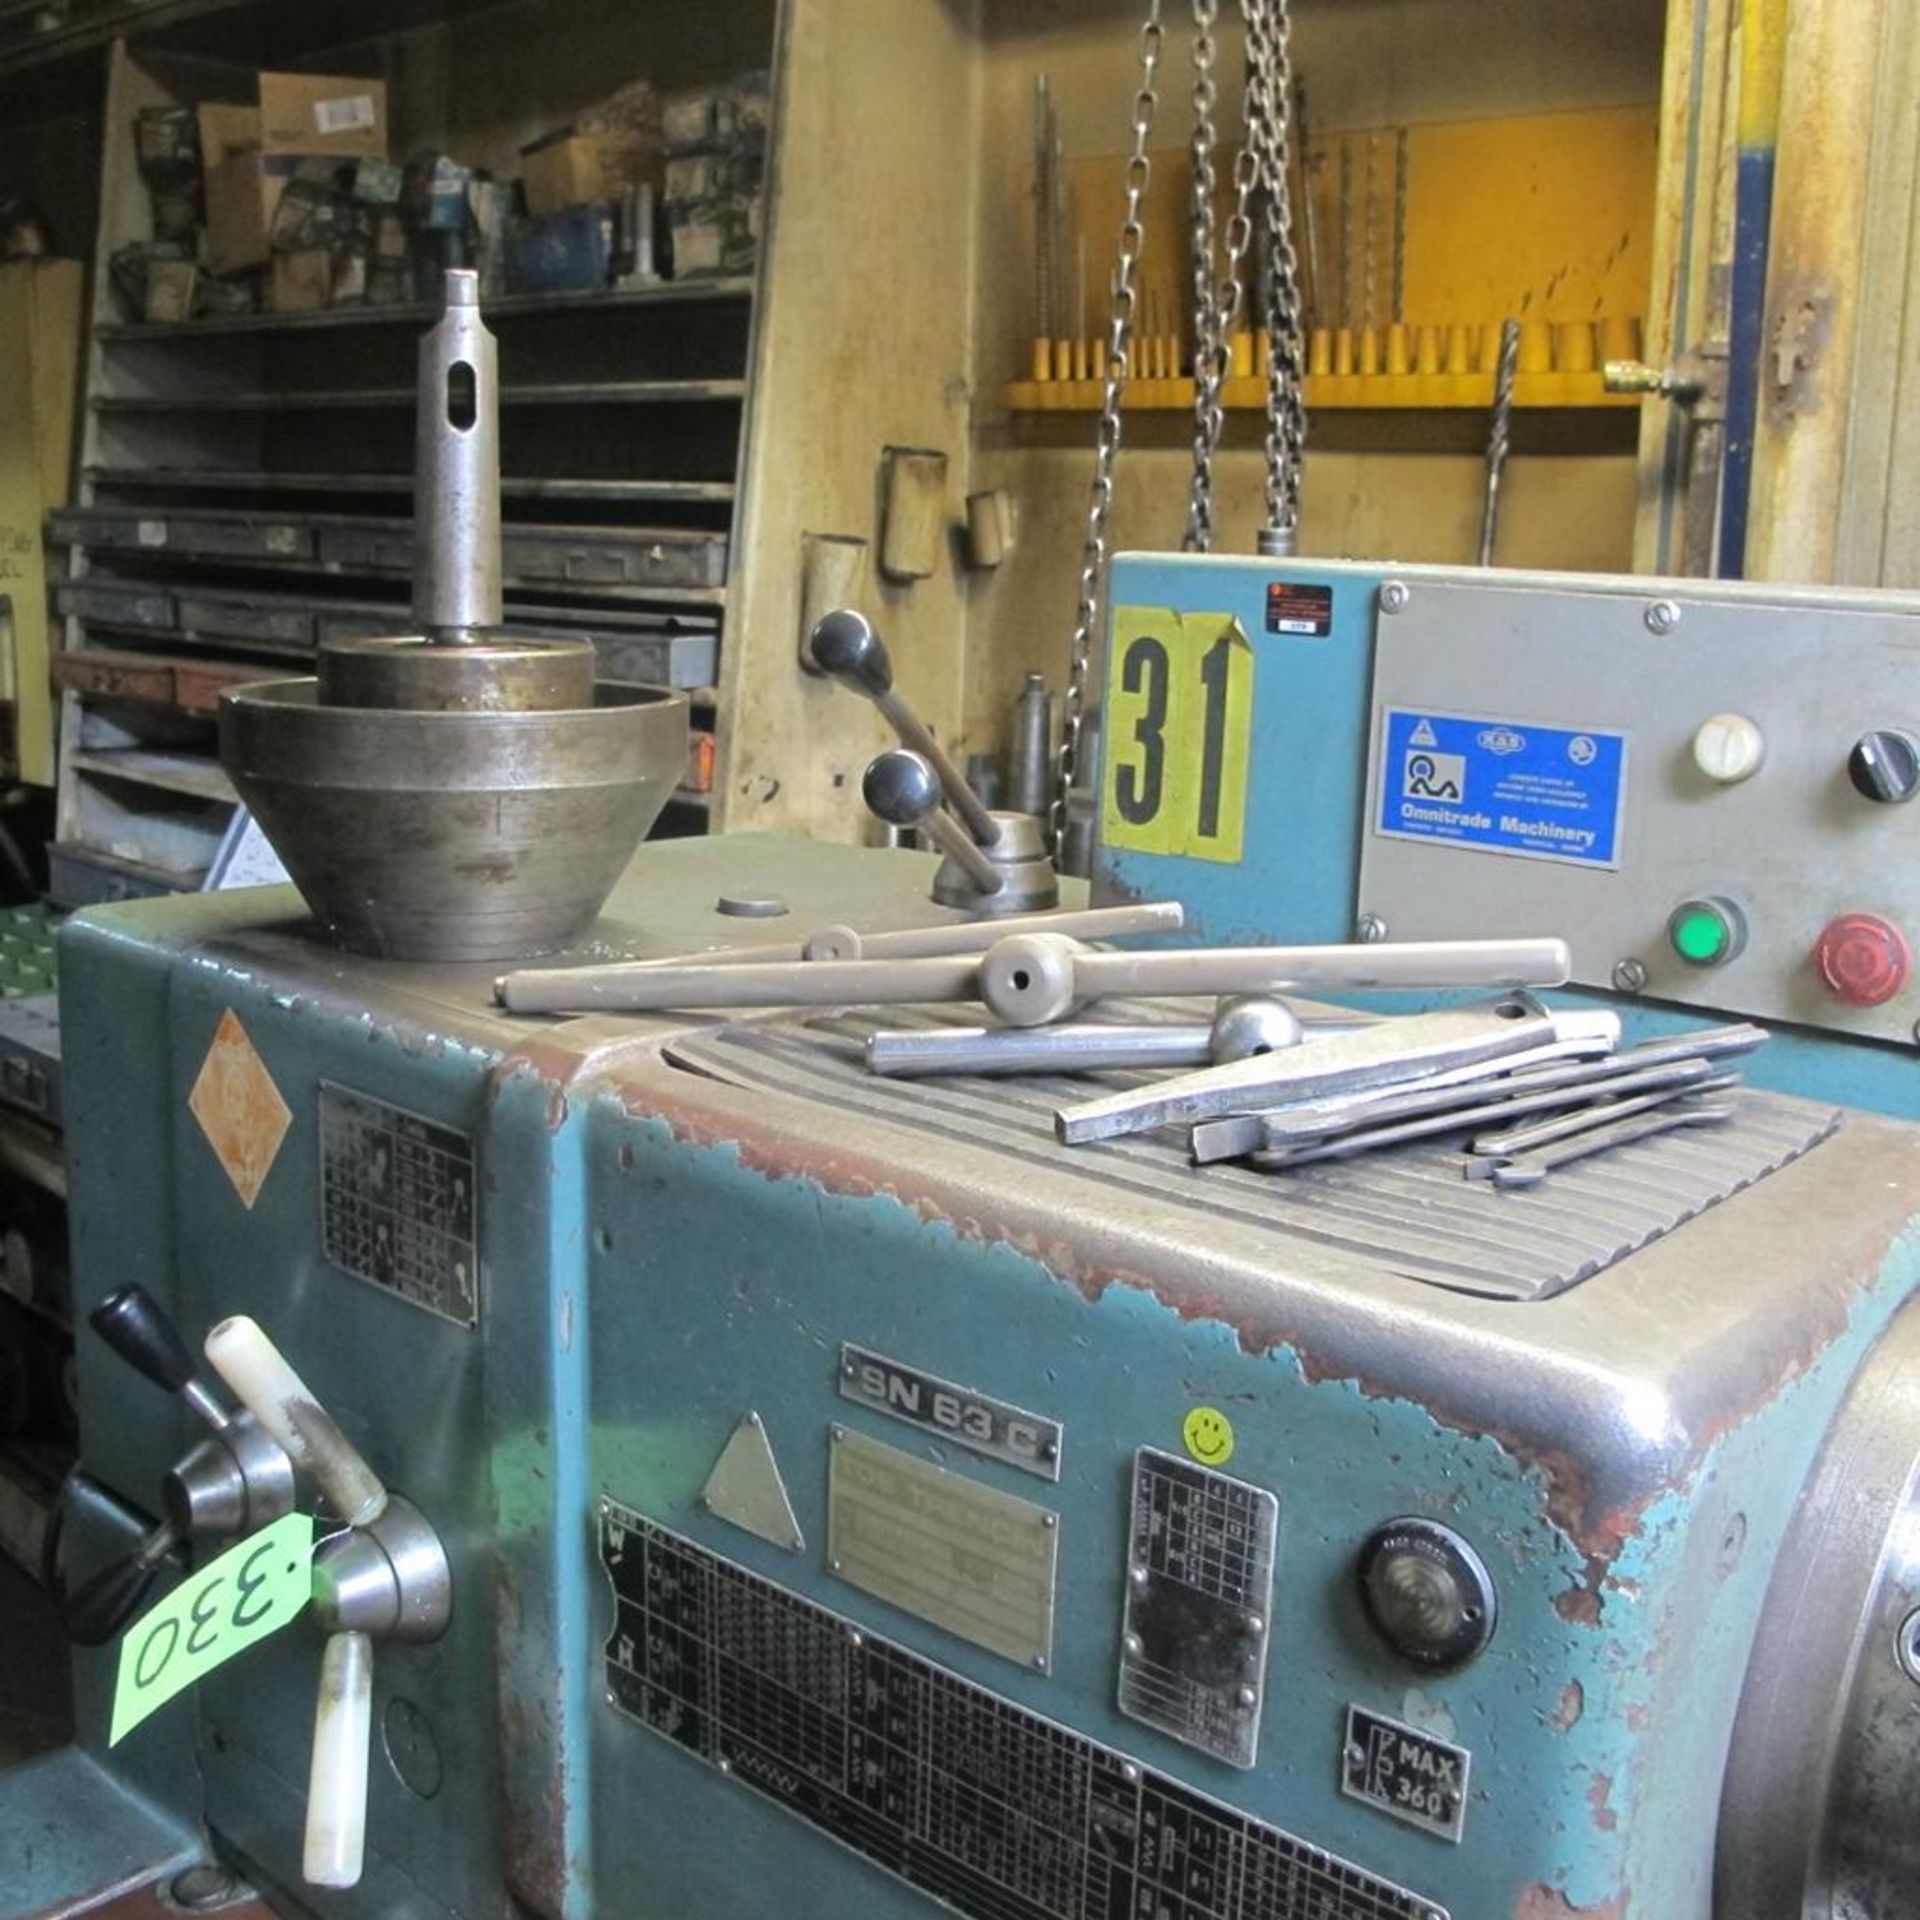 TOS LATHE MODEL SN 63 C, 28" X 120", 12" 3 JAW CHUCK, SPARE 20" 4 JAW CHUCK, 3" SPINDLE BORE, TOOL H - Image 5 of 10